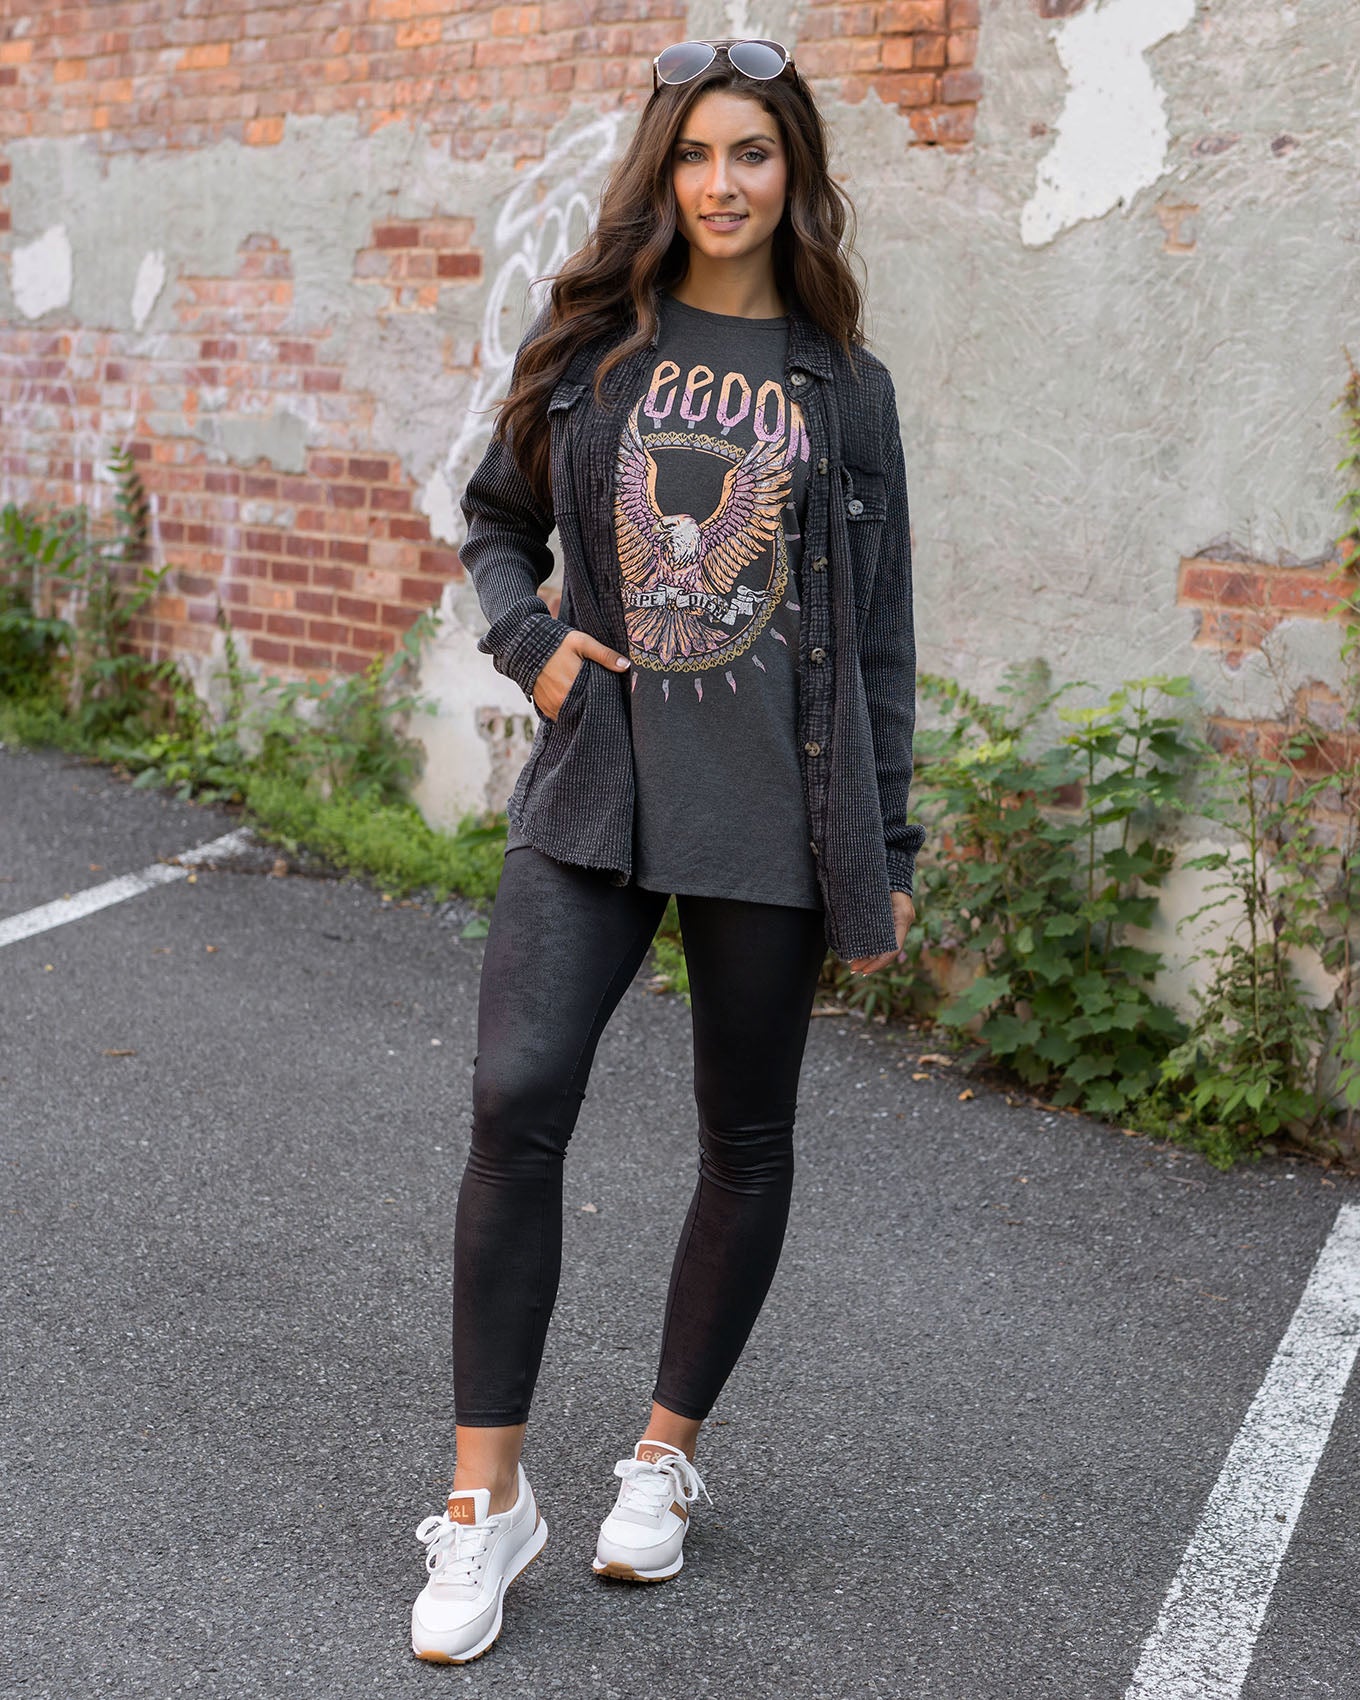 Black Leggings with Grey Crew-neck T-shirt Outfits (18 ideas & outfits)